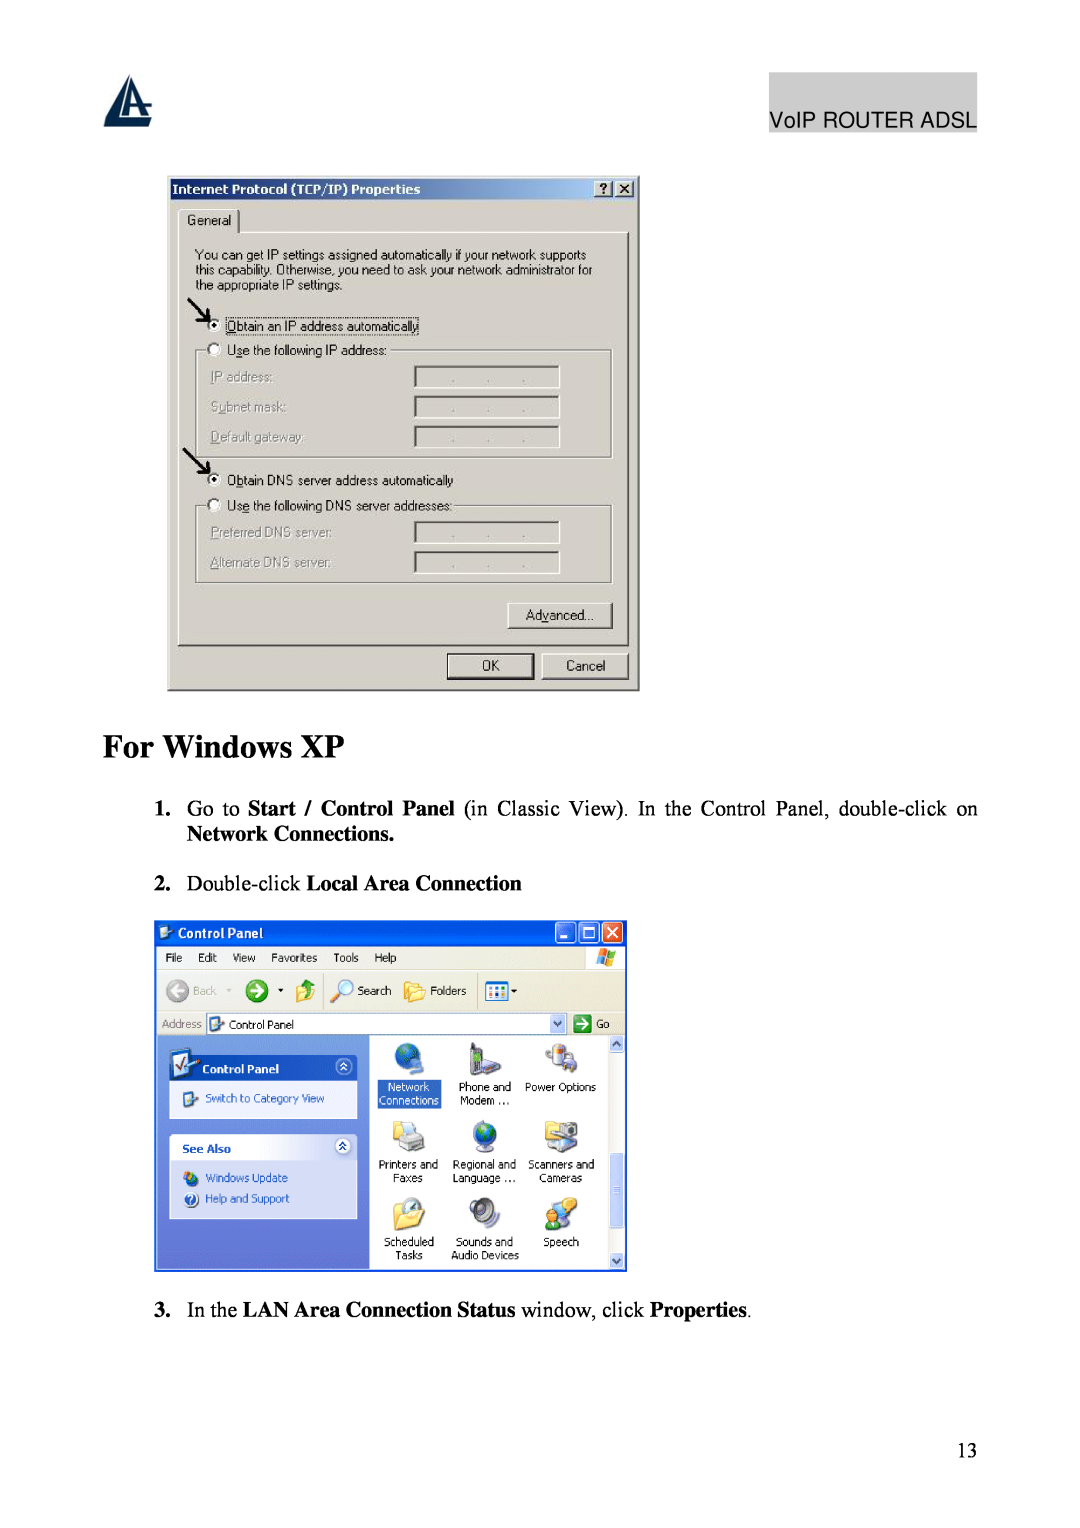 Atlantis Land A02-RAV211 manual For Windows XP, Network Connections 2. Double-click Local Area Connection, VoIP ROUTER ADSL 